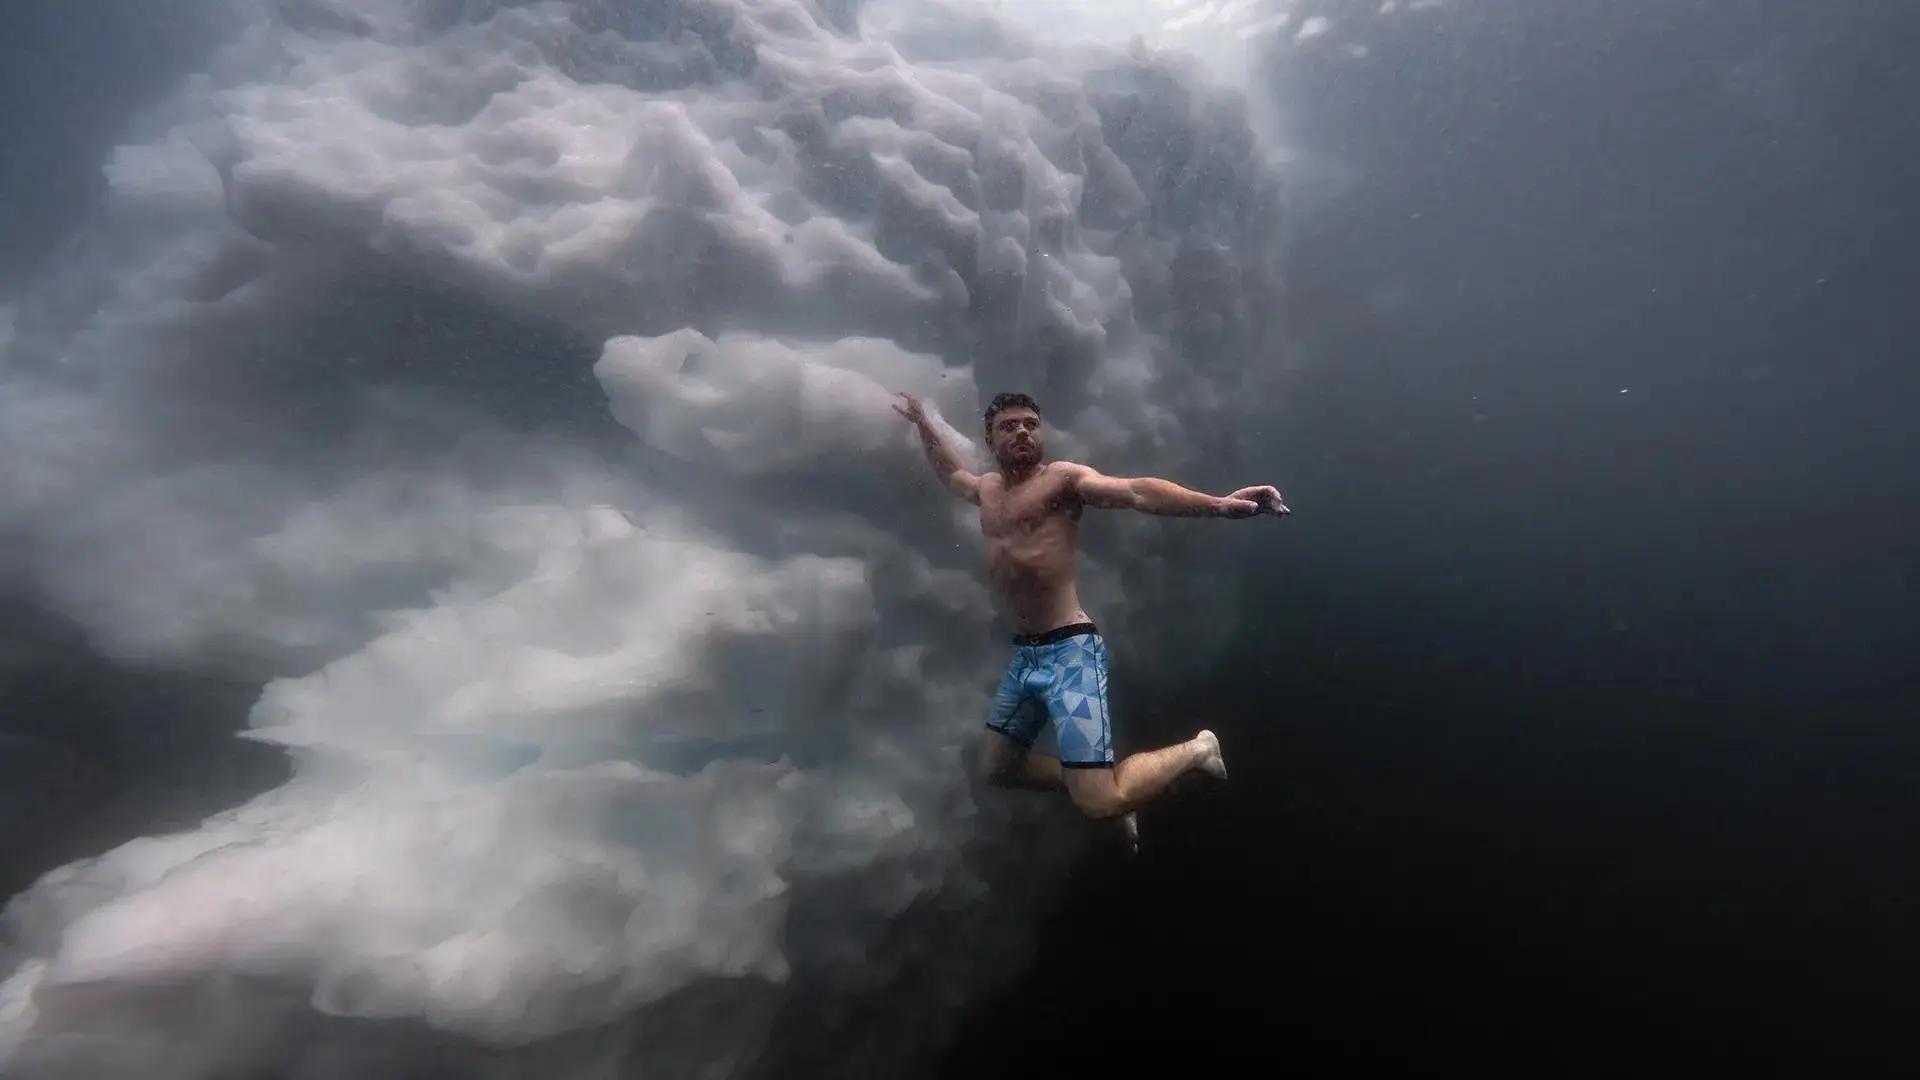 Spectacular underwater photo of man in shorts swimming below the surface next to a large block of submerged sea ice.